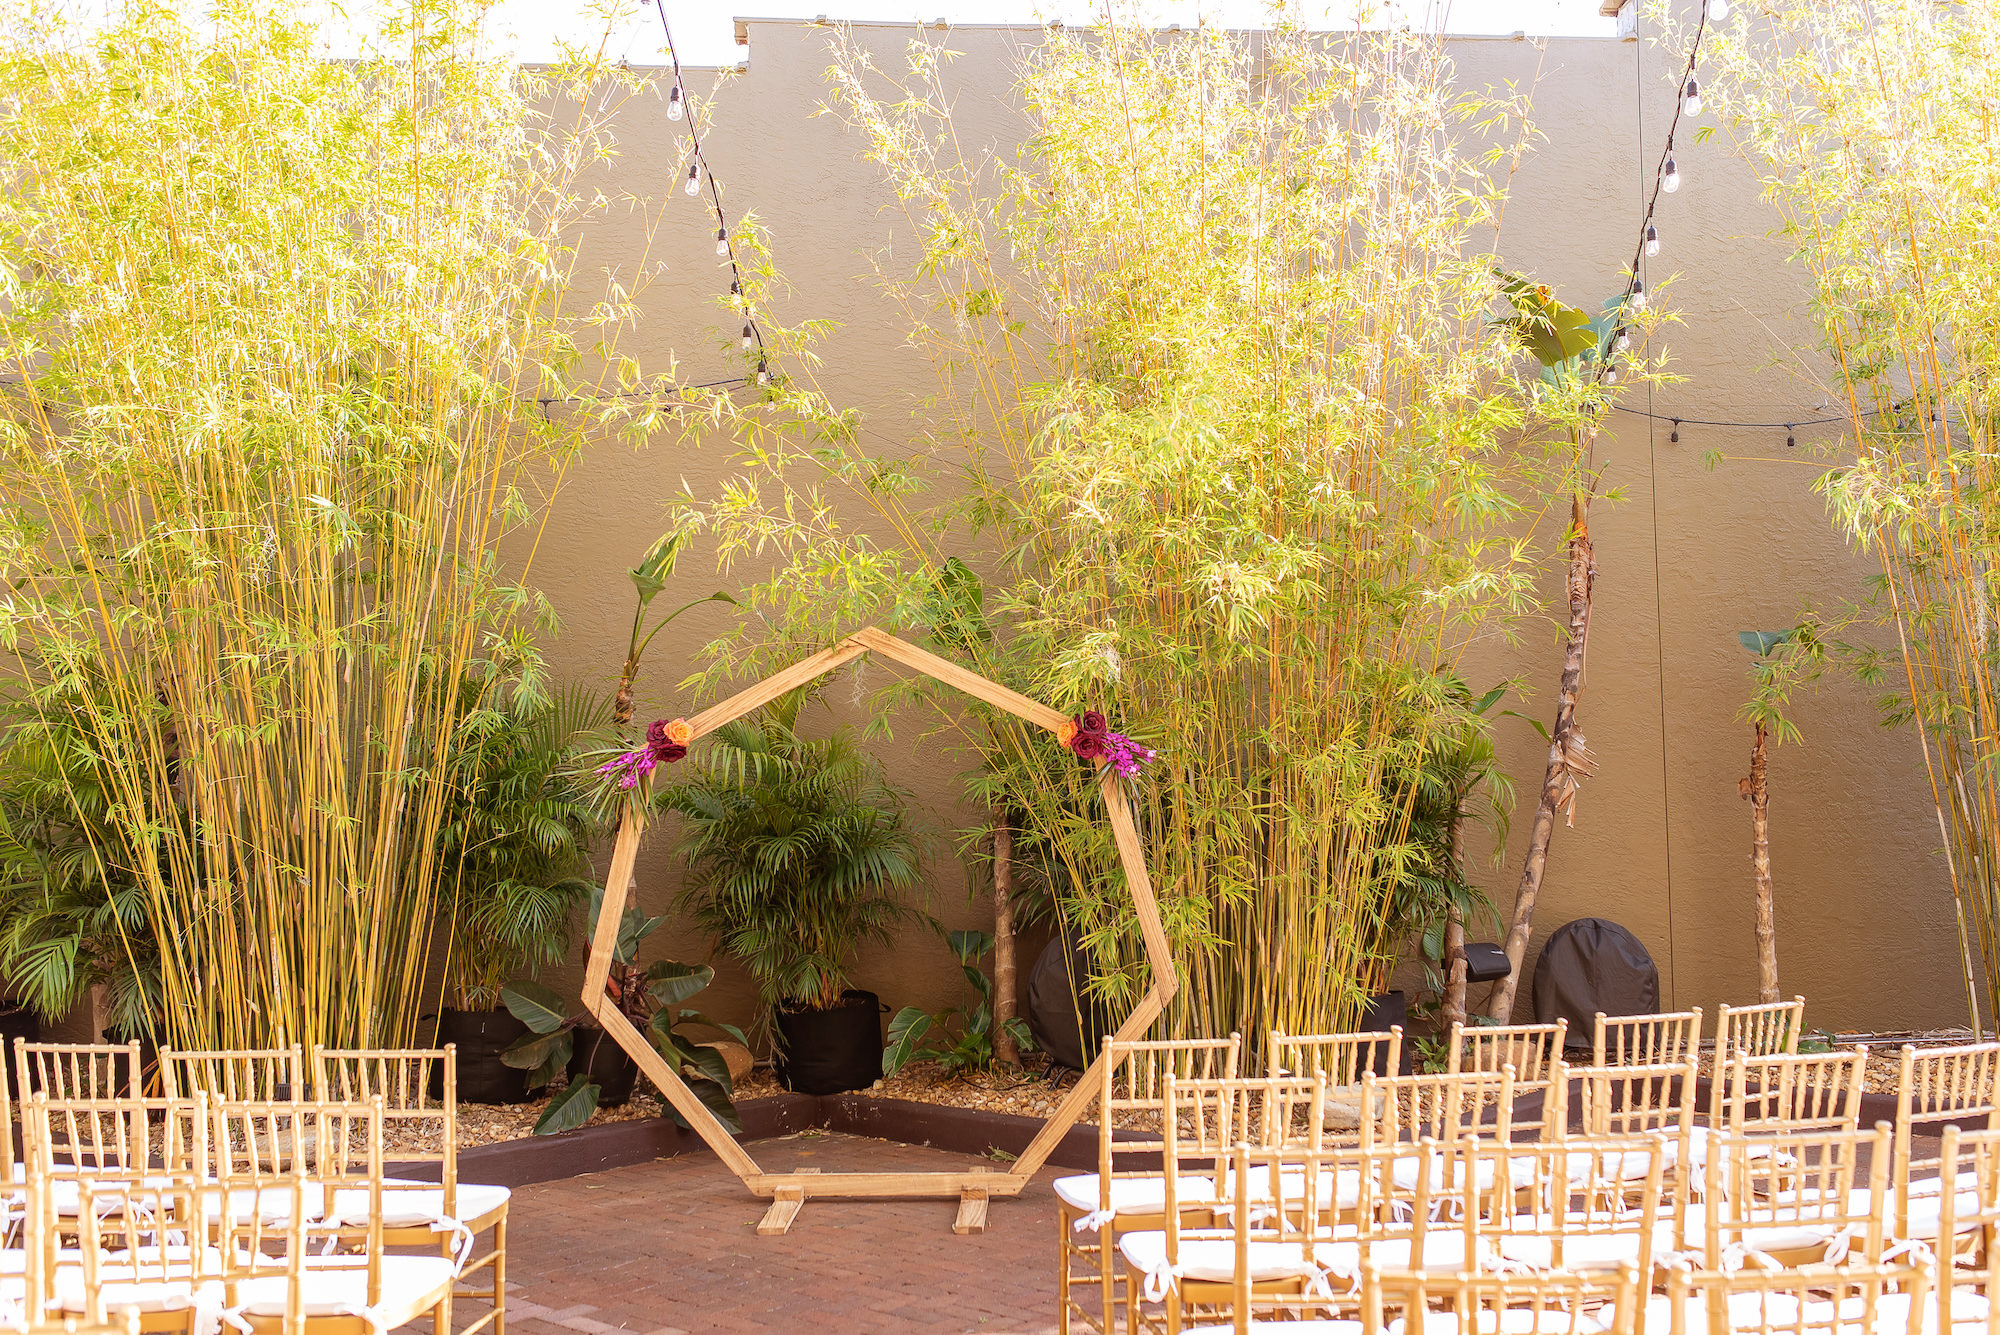 Gold Octagon Arch with Fuchsia Detailing in Tropical Outdoor Wedding and Gold Chiavari Chairs | St. Petersburg Wedding Venue Nova 535